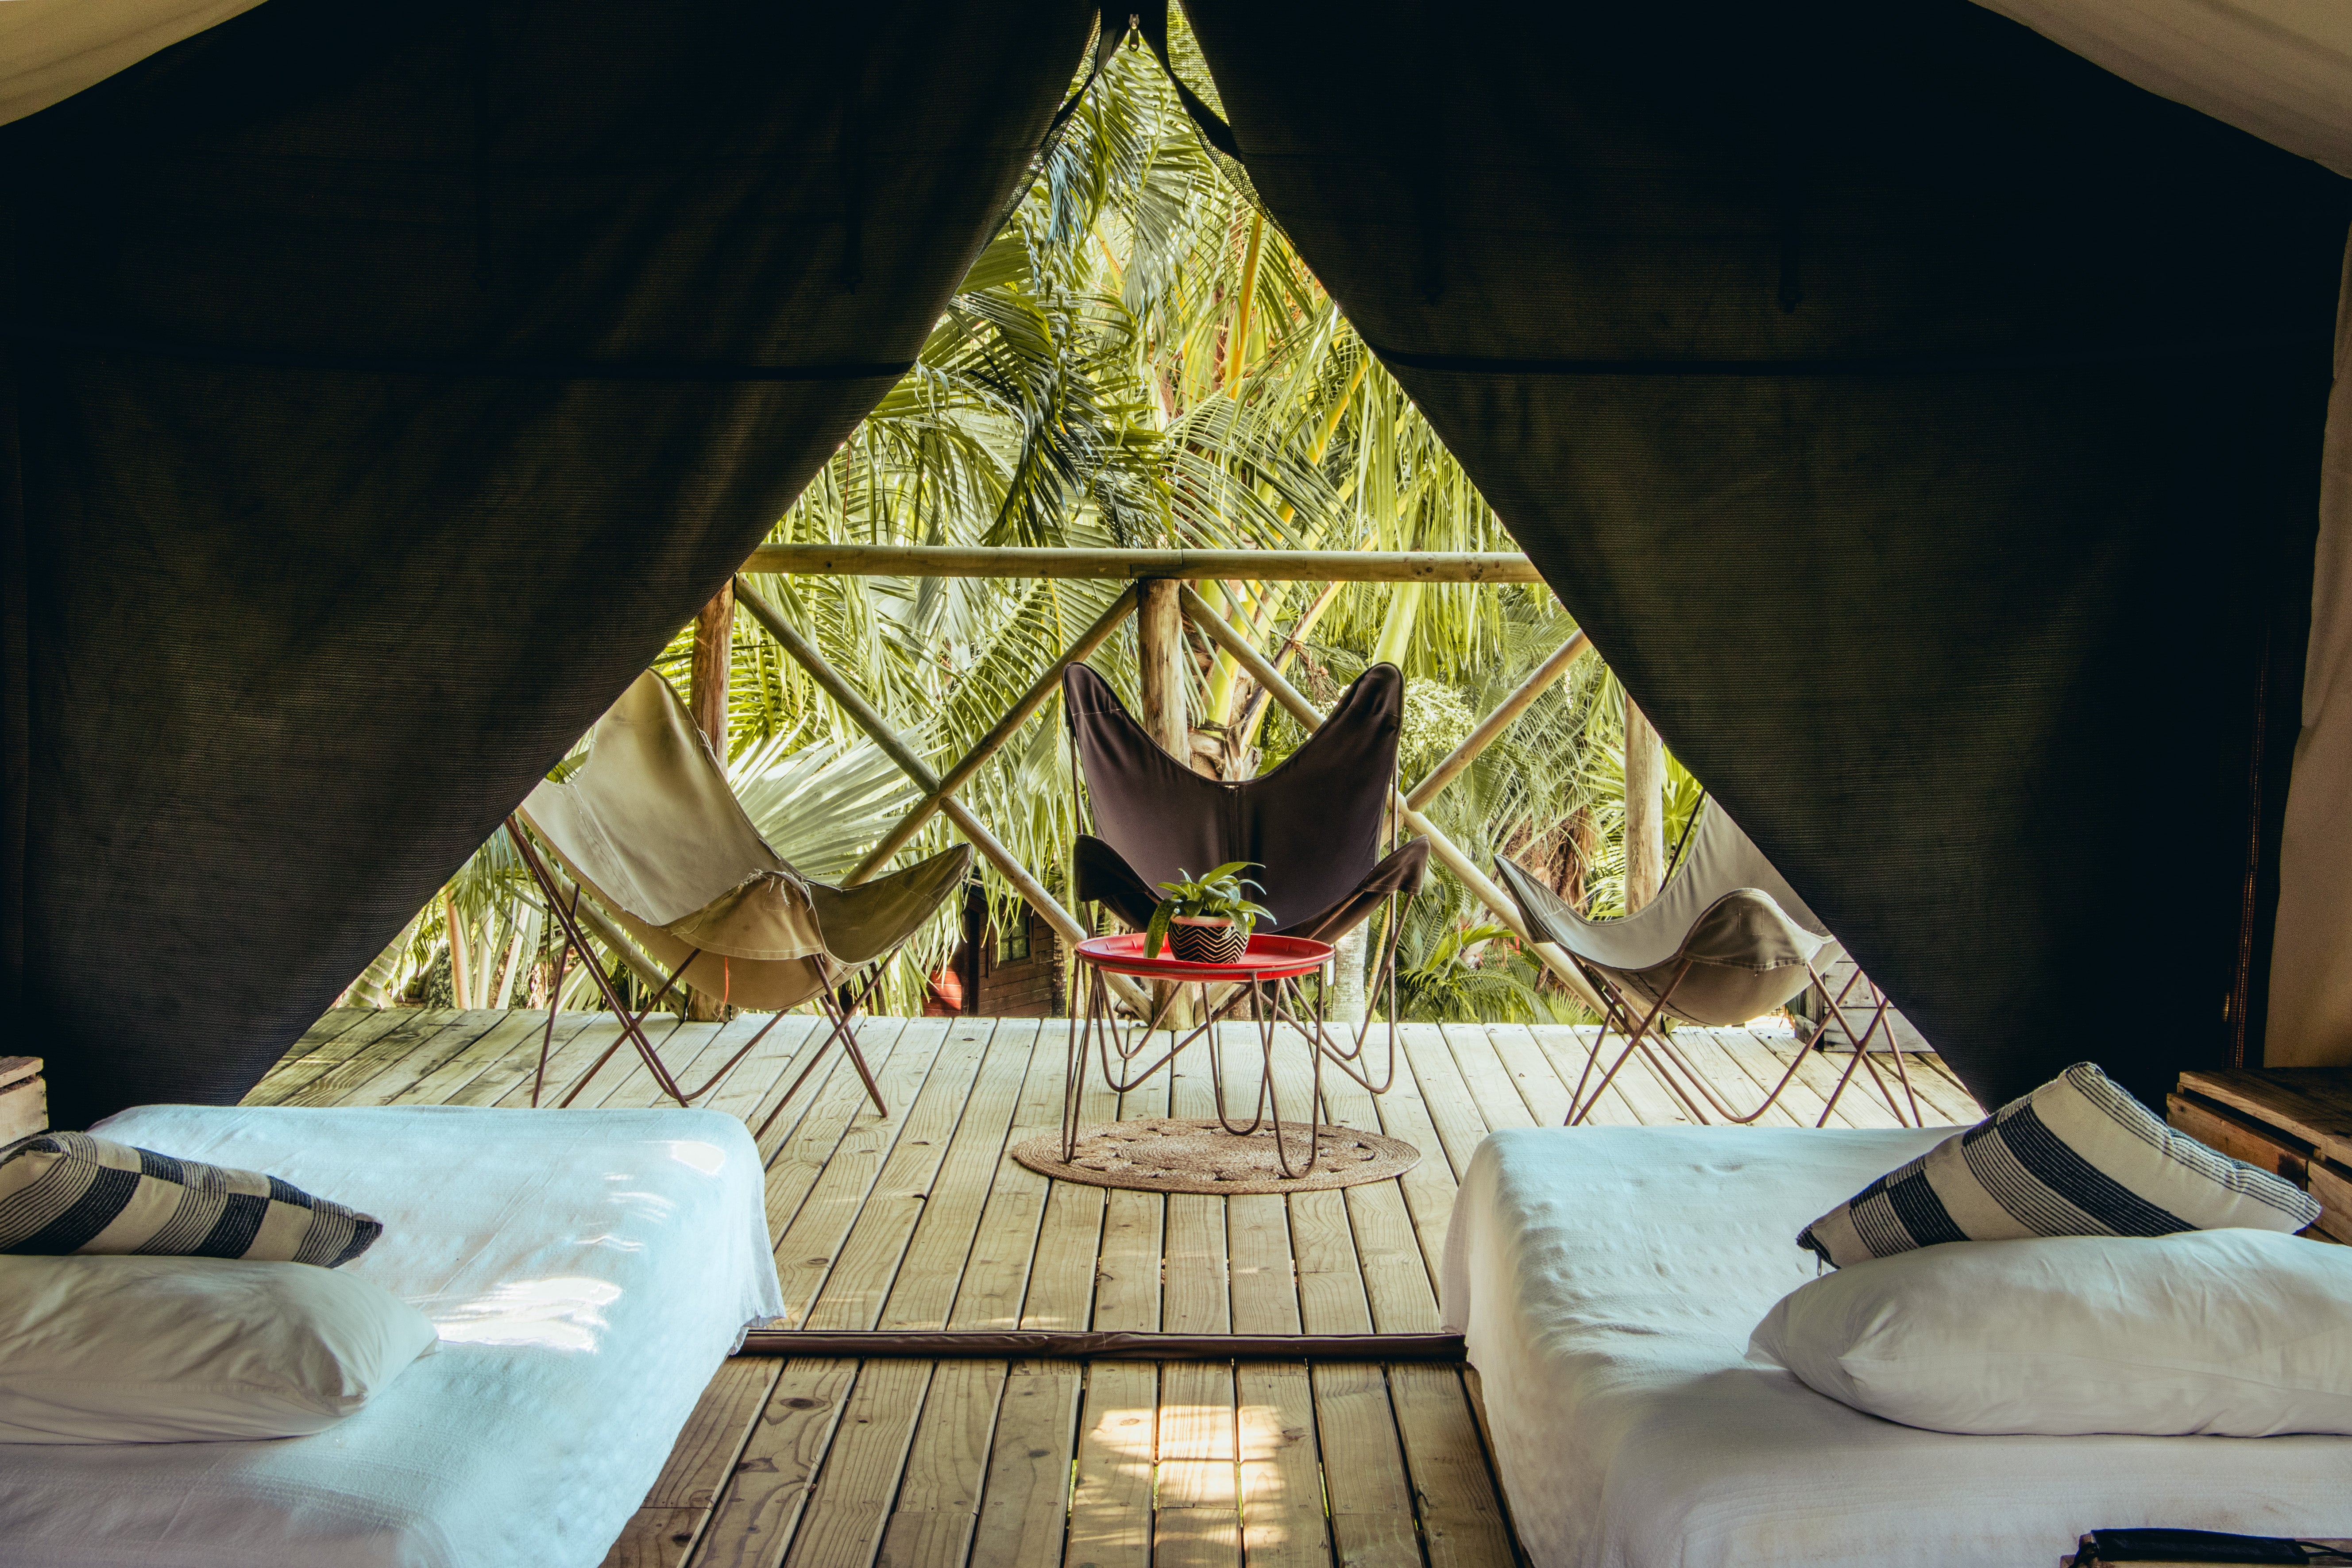 This glamping spot is complete with 12 safari-style tents